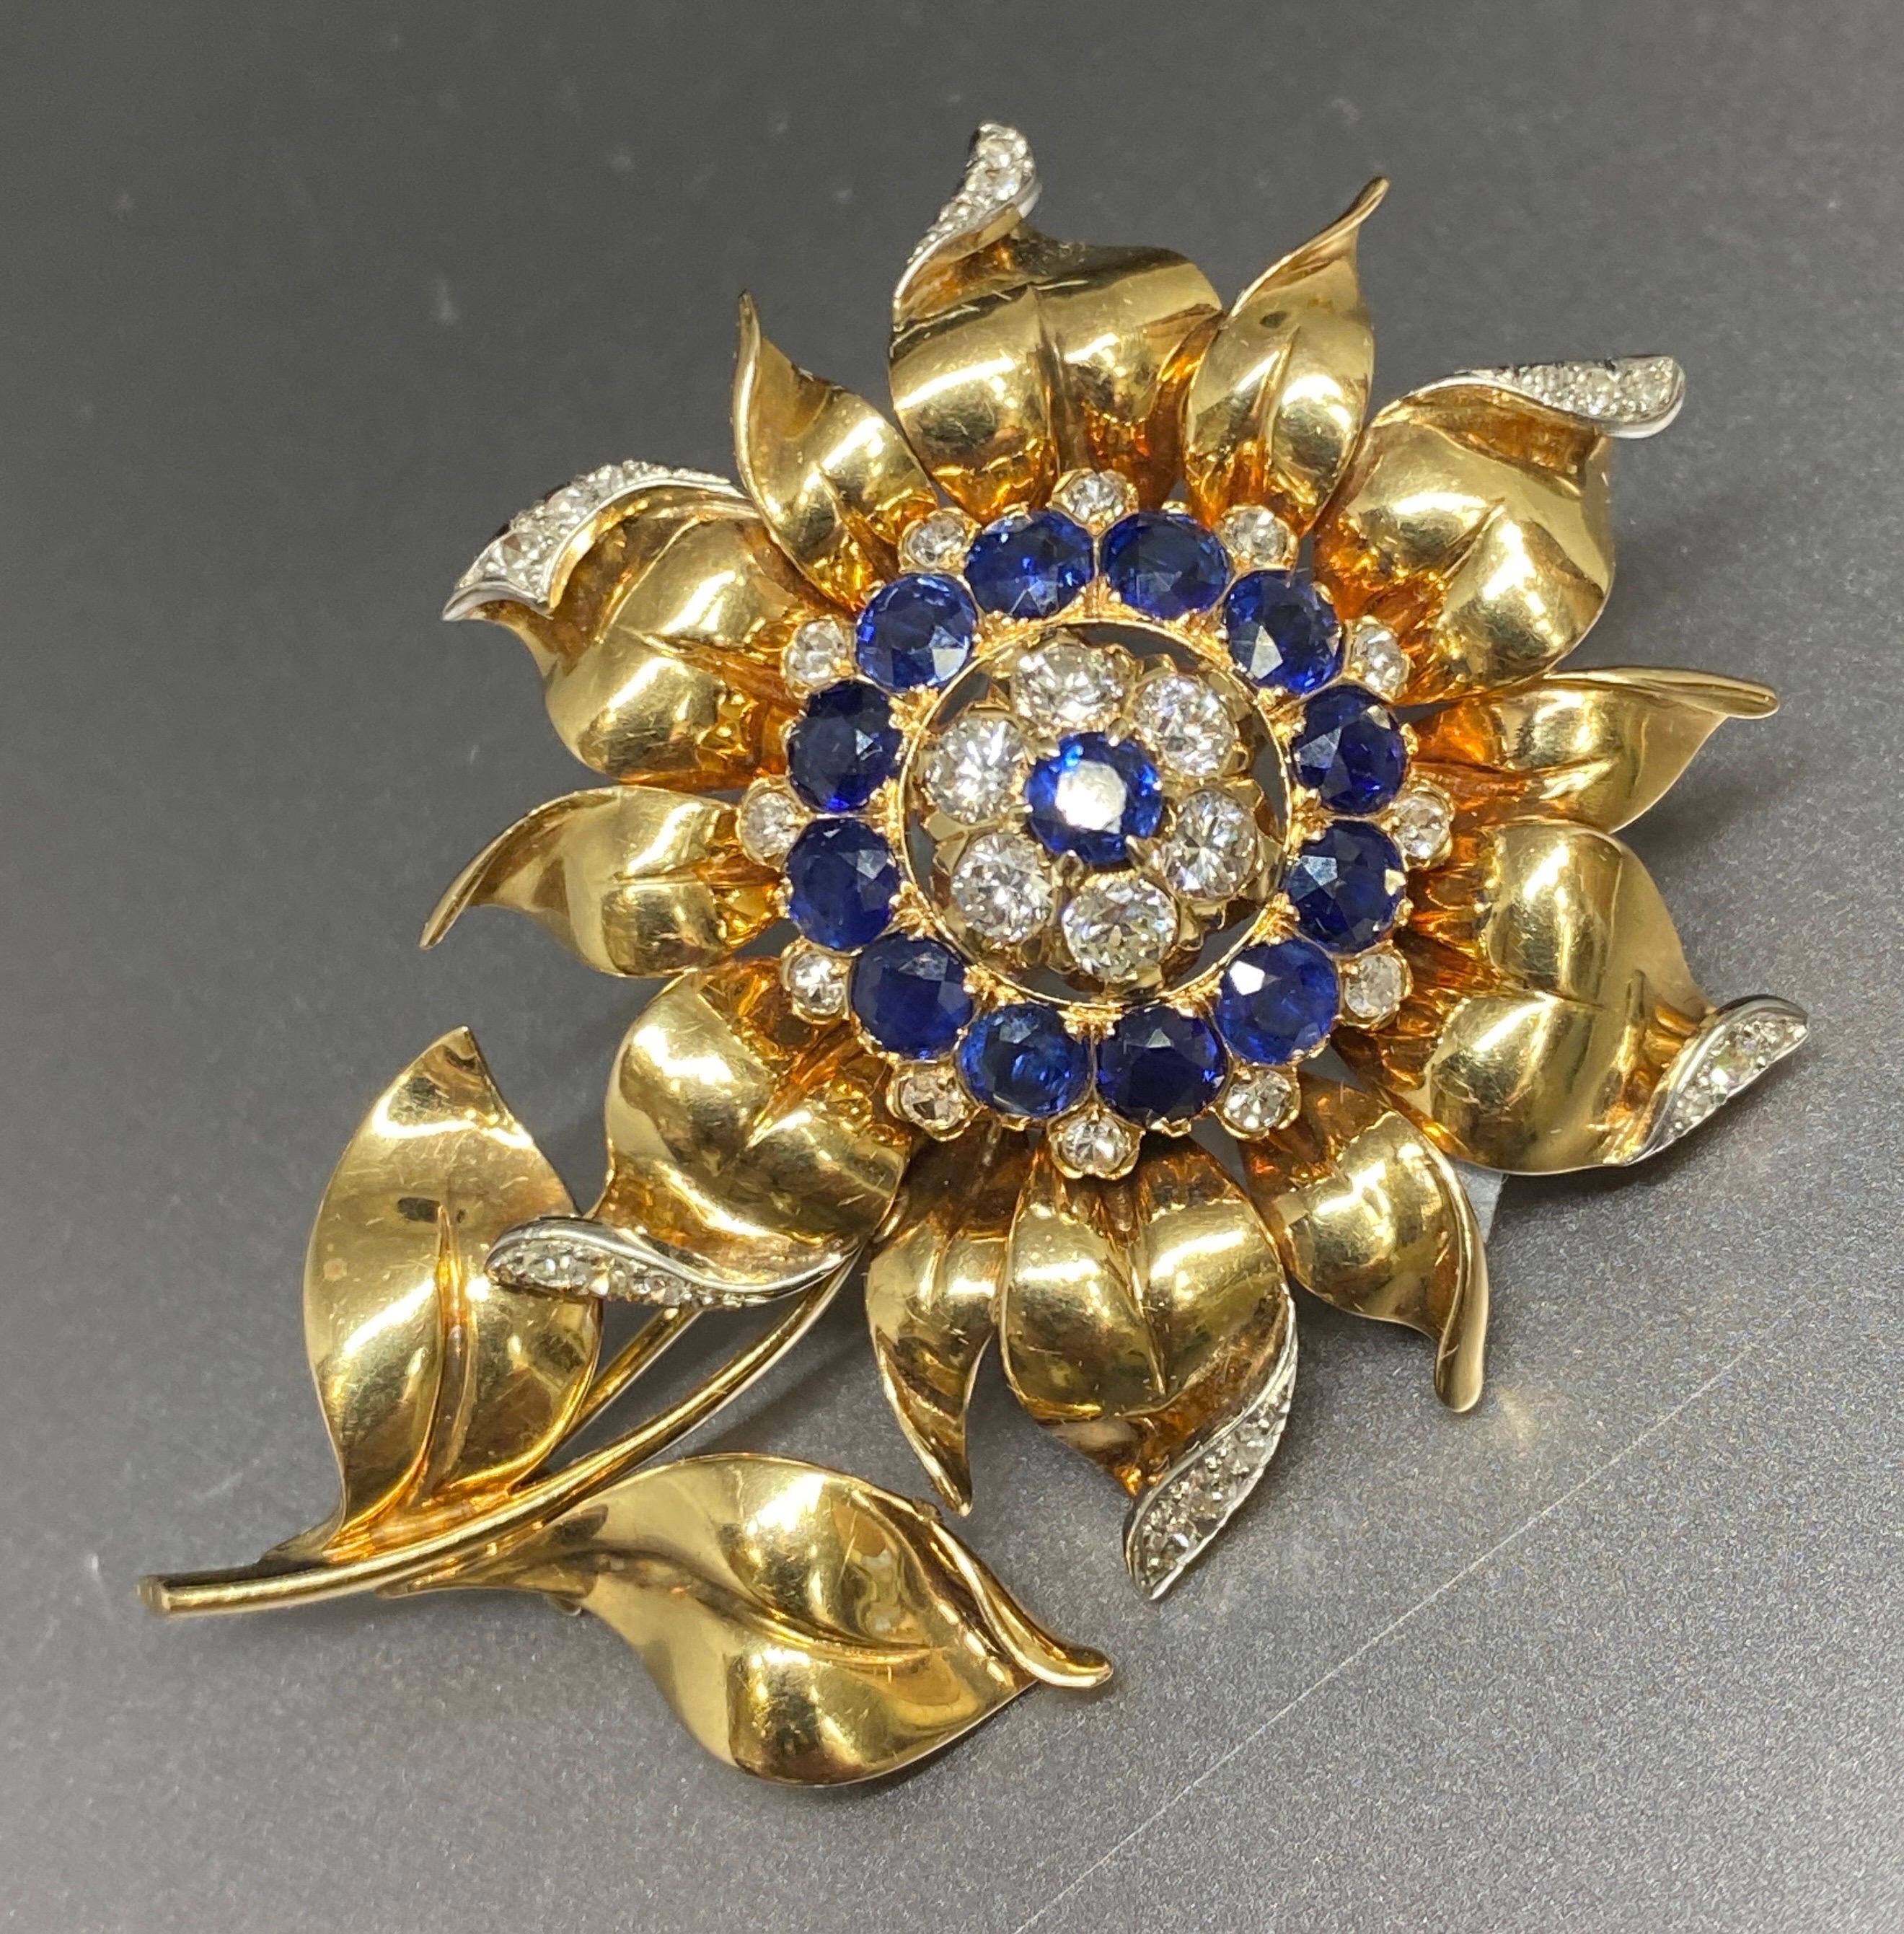 Up for your consideration is this superb floral brooch circa 1940's.
A true stunner this brooch is finely made of 14k yellow gold and features a domed center of sparkling gems alternating between rows of fine natural round brilliant cut and single